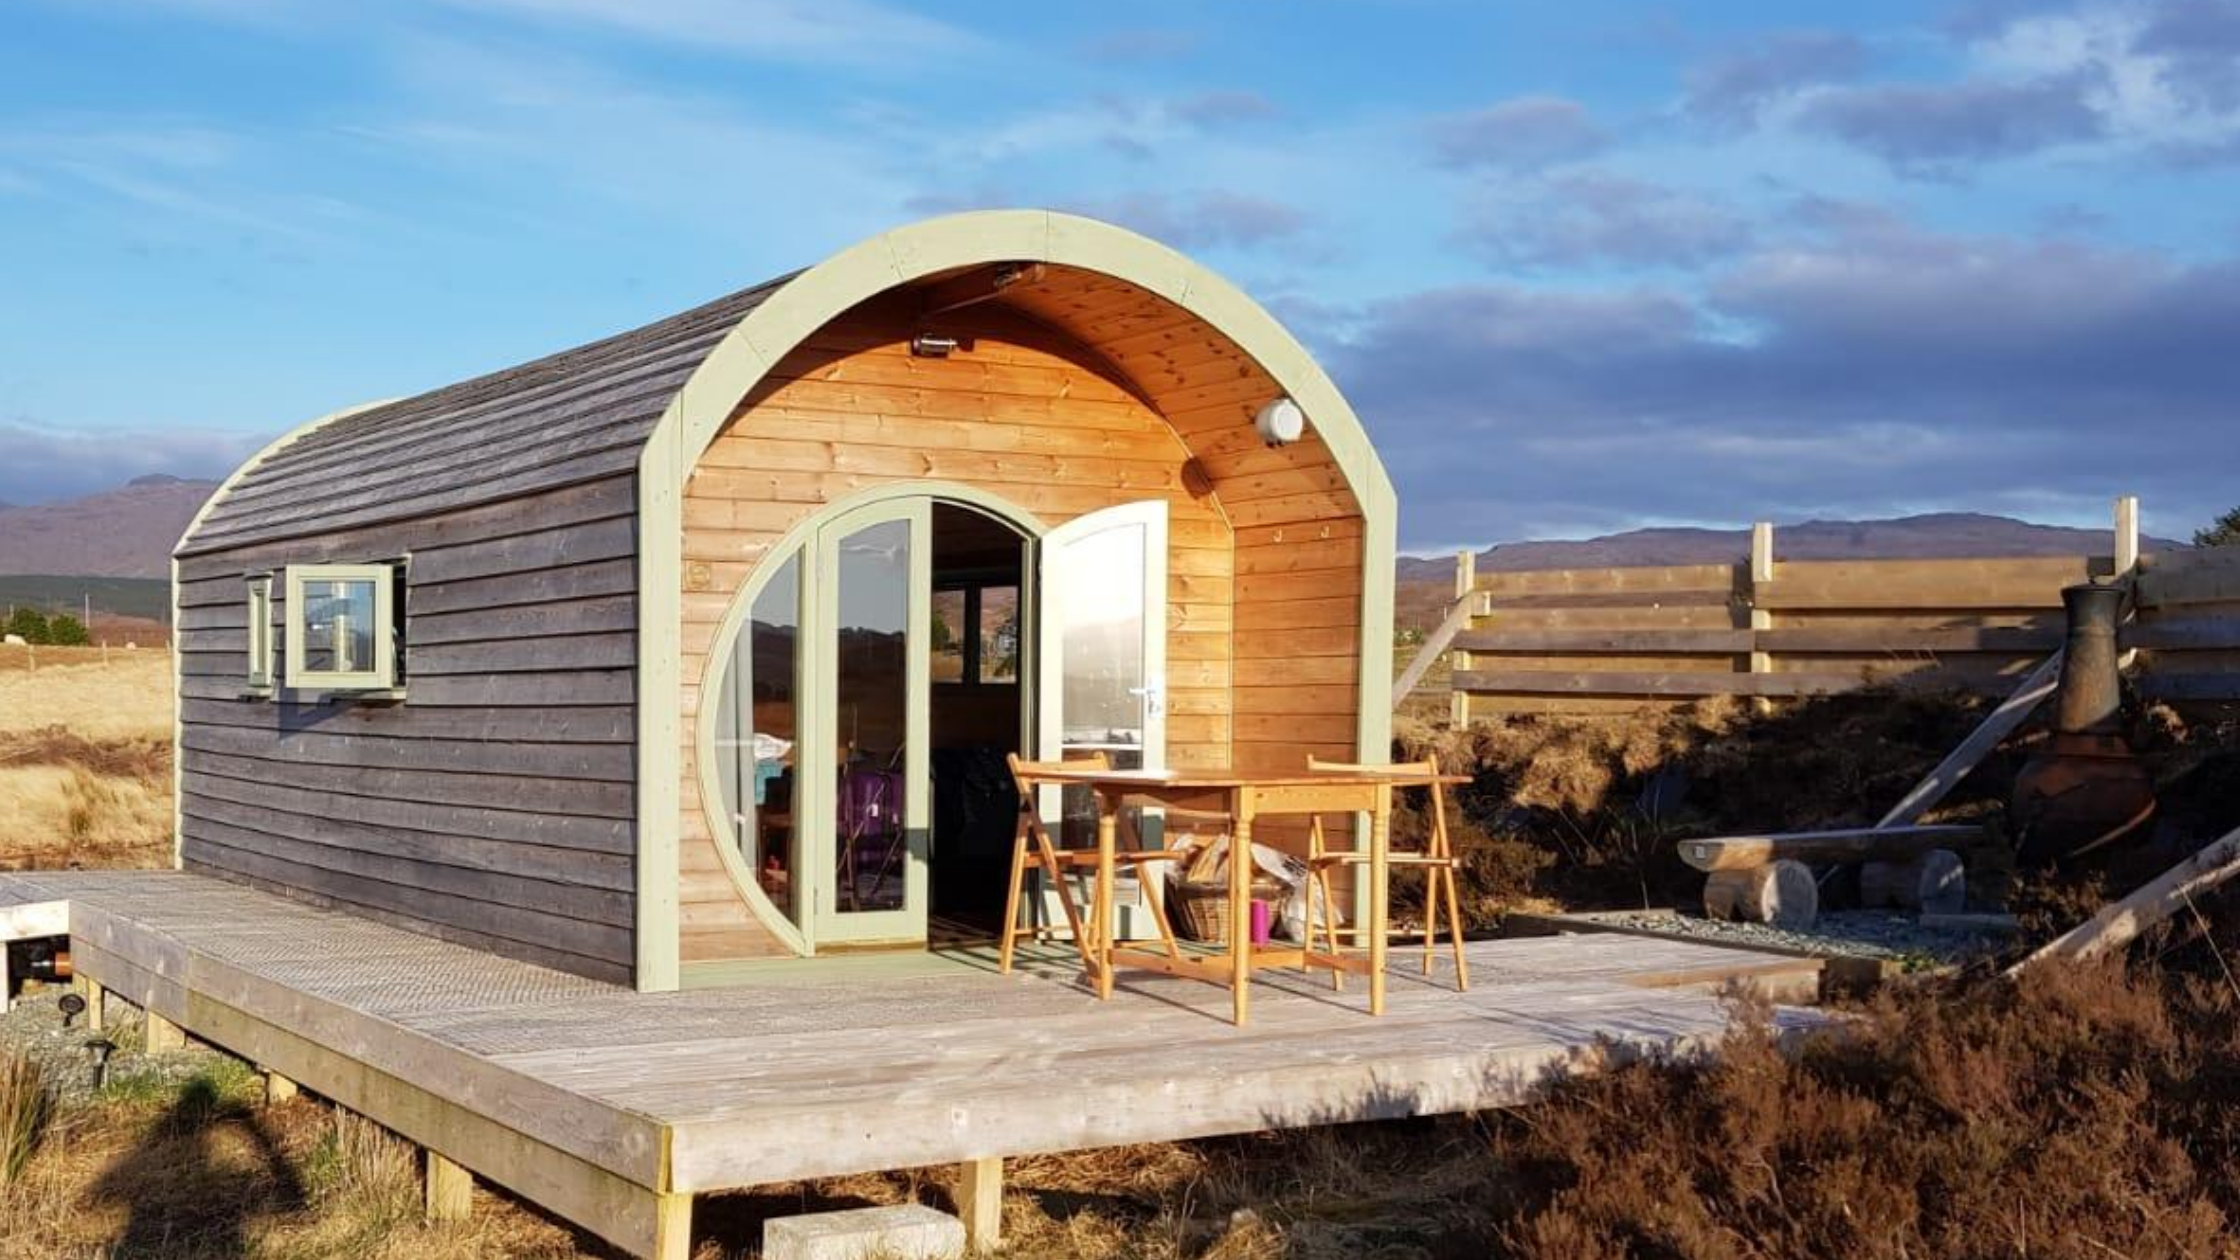 Unusual & Romantic Countryside Retreats For Your October Staycation